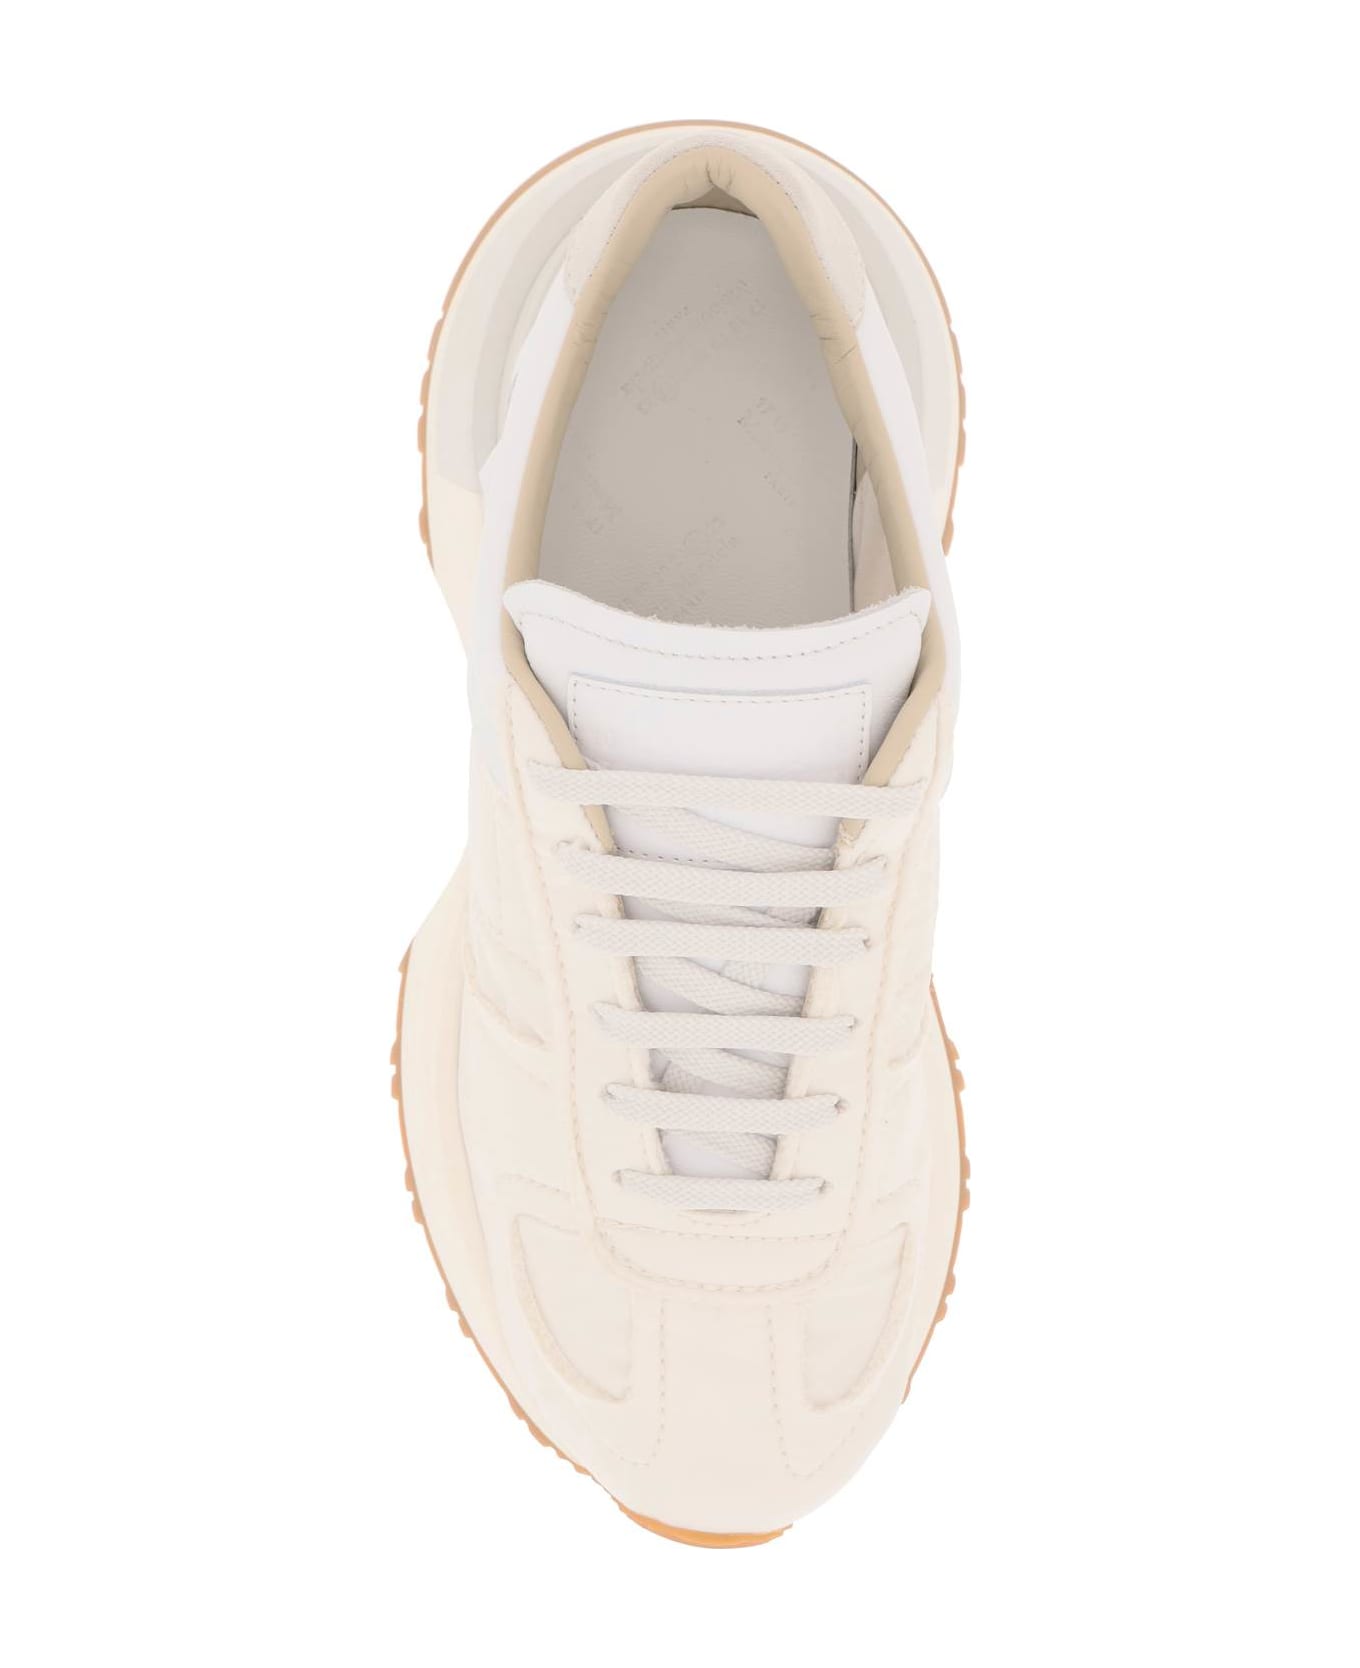 Maison Margiela Laced Low Sneakers - White スニーカー